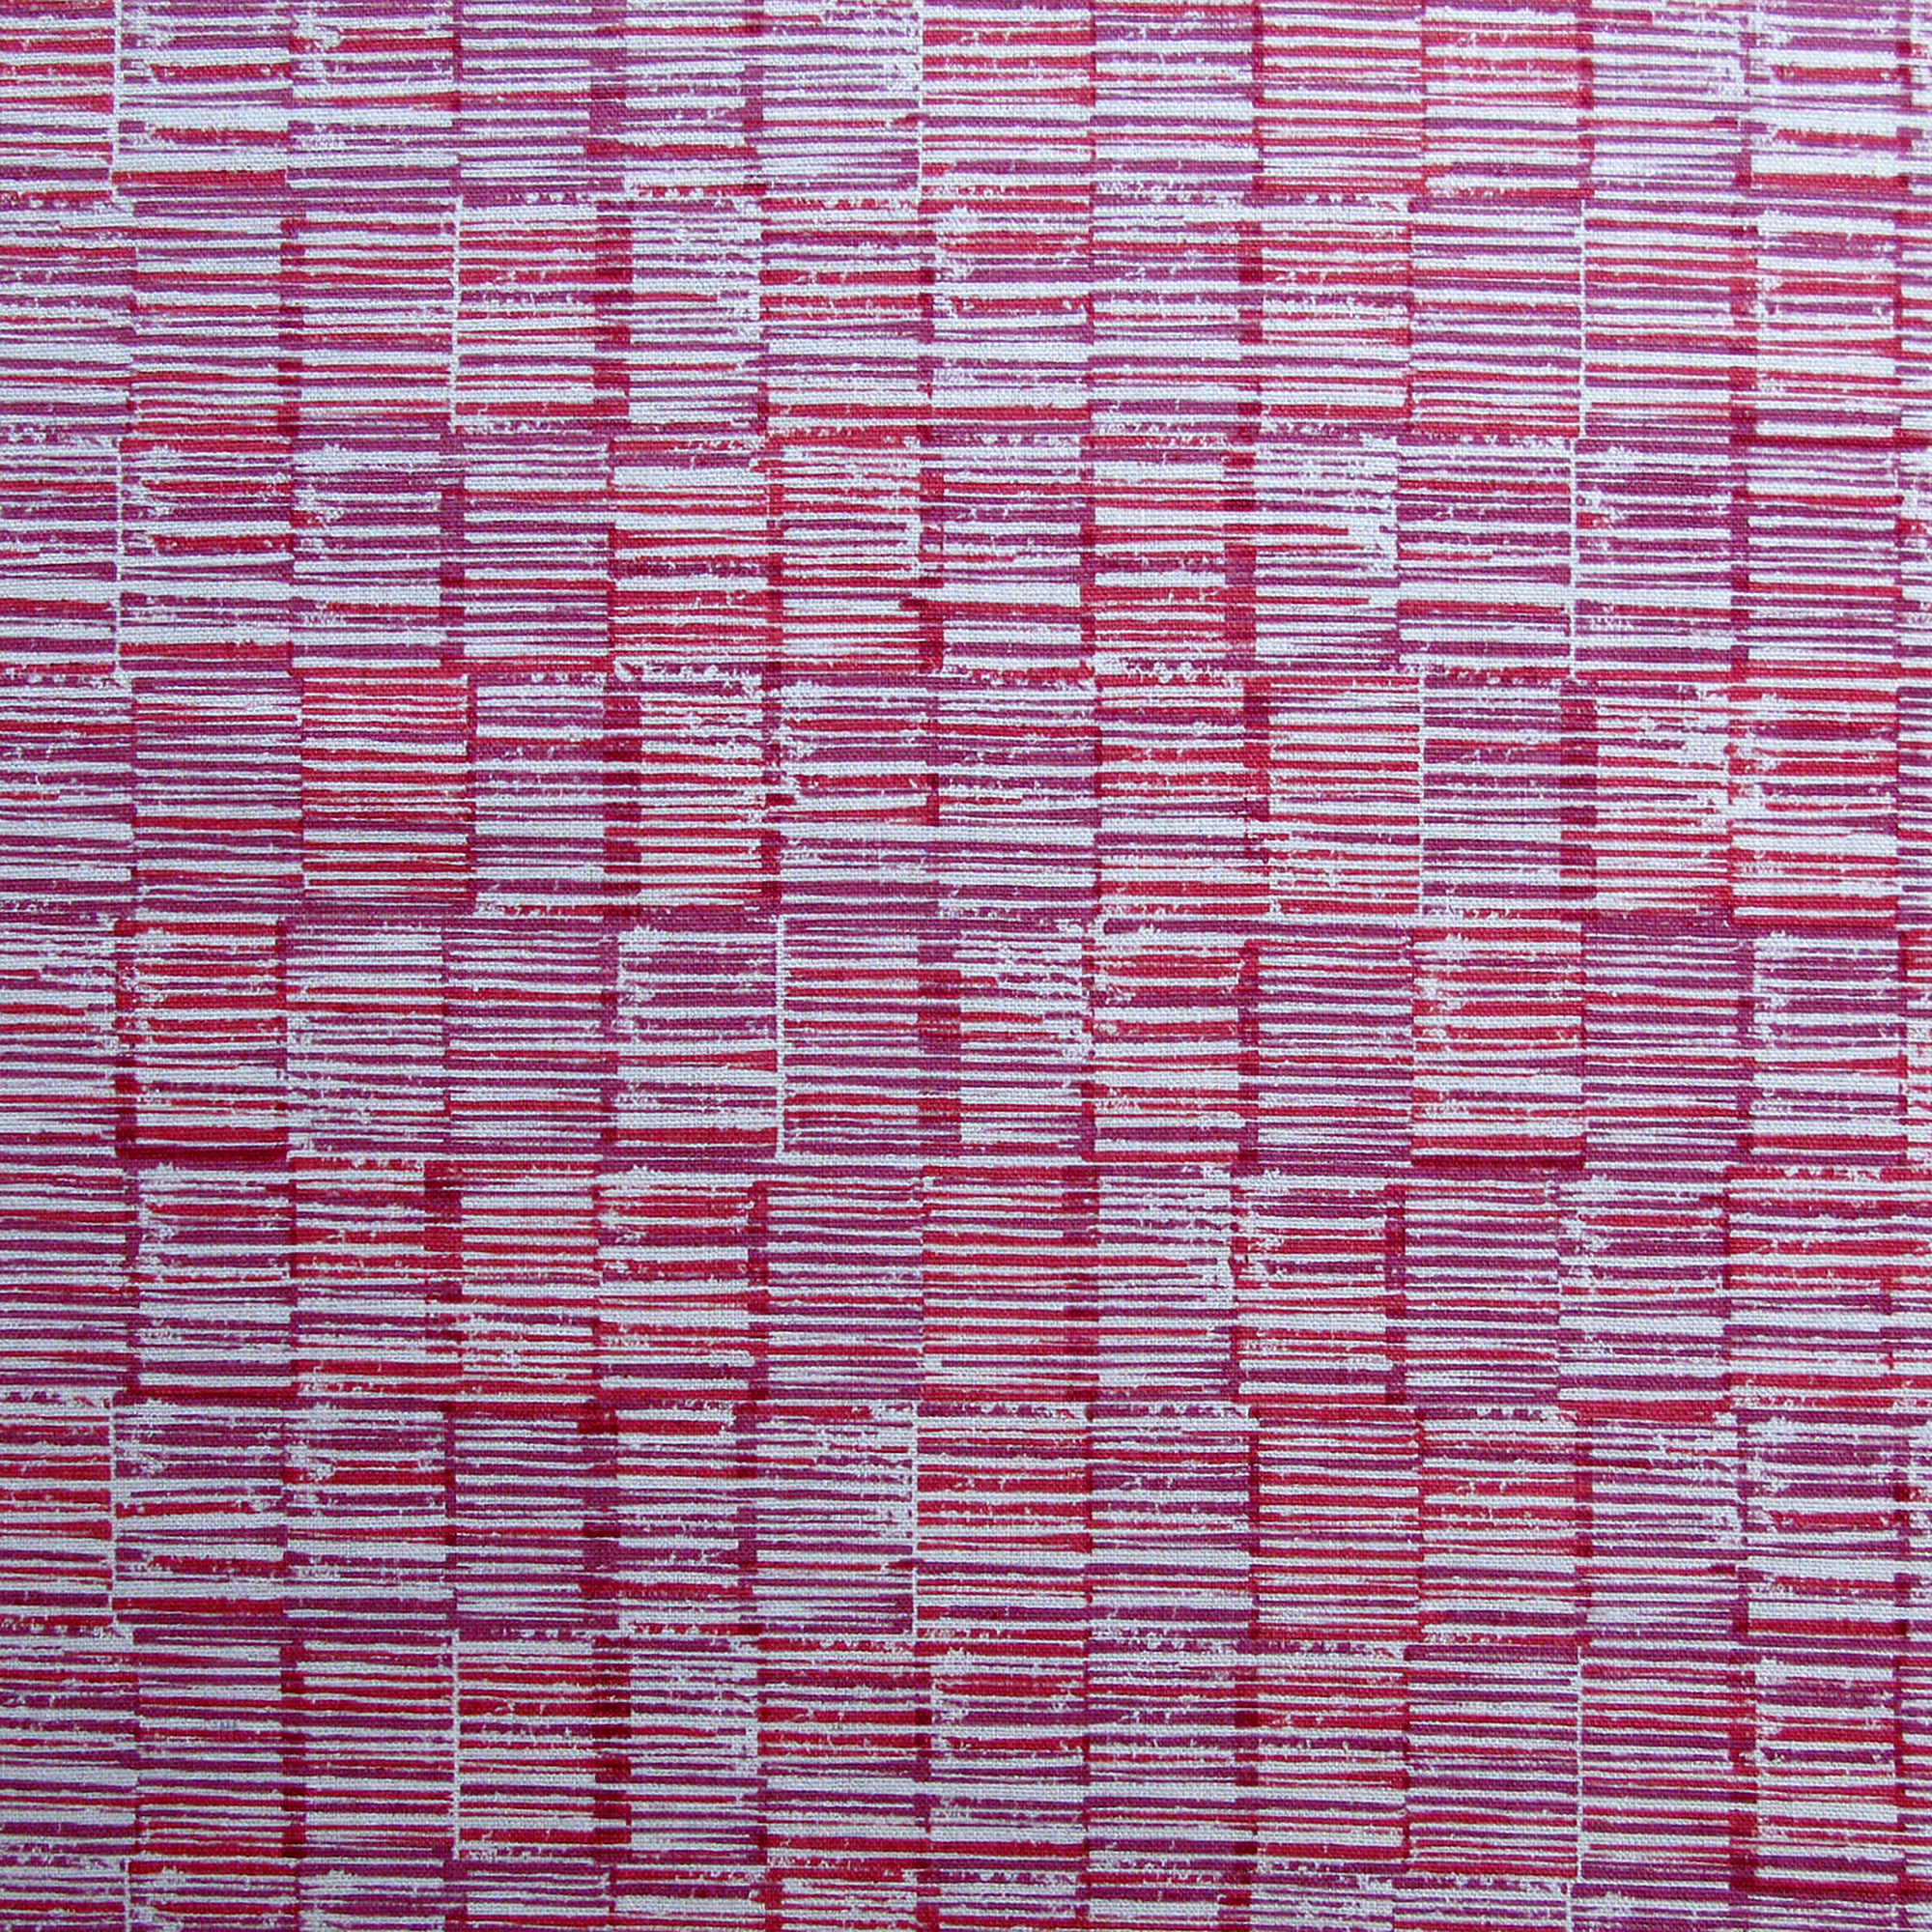 Detail of fabric in a textural grid print in pink and purple on a light gray field.